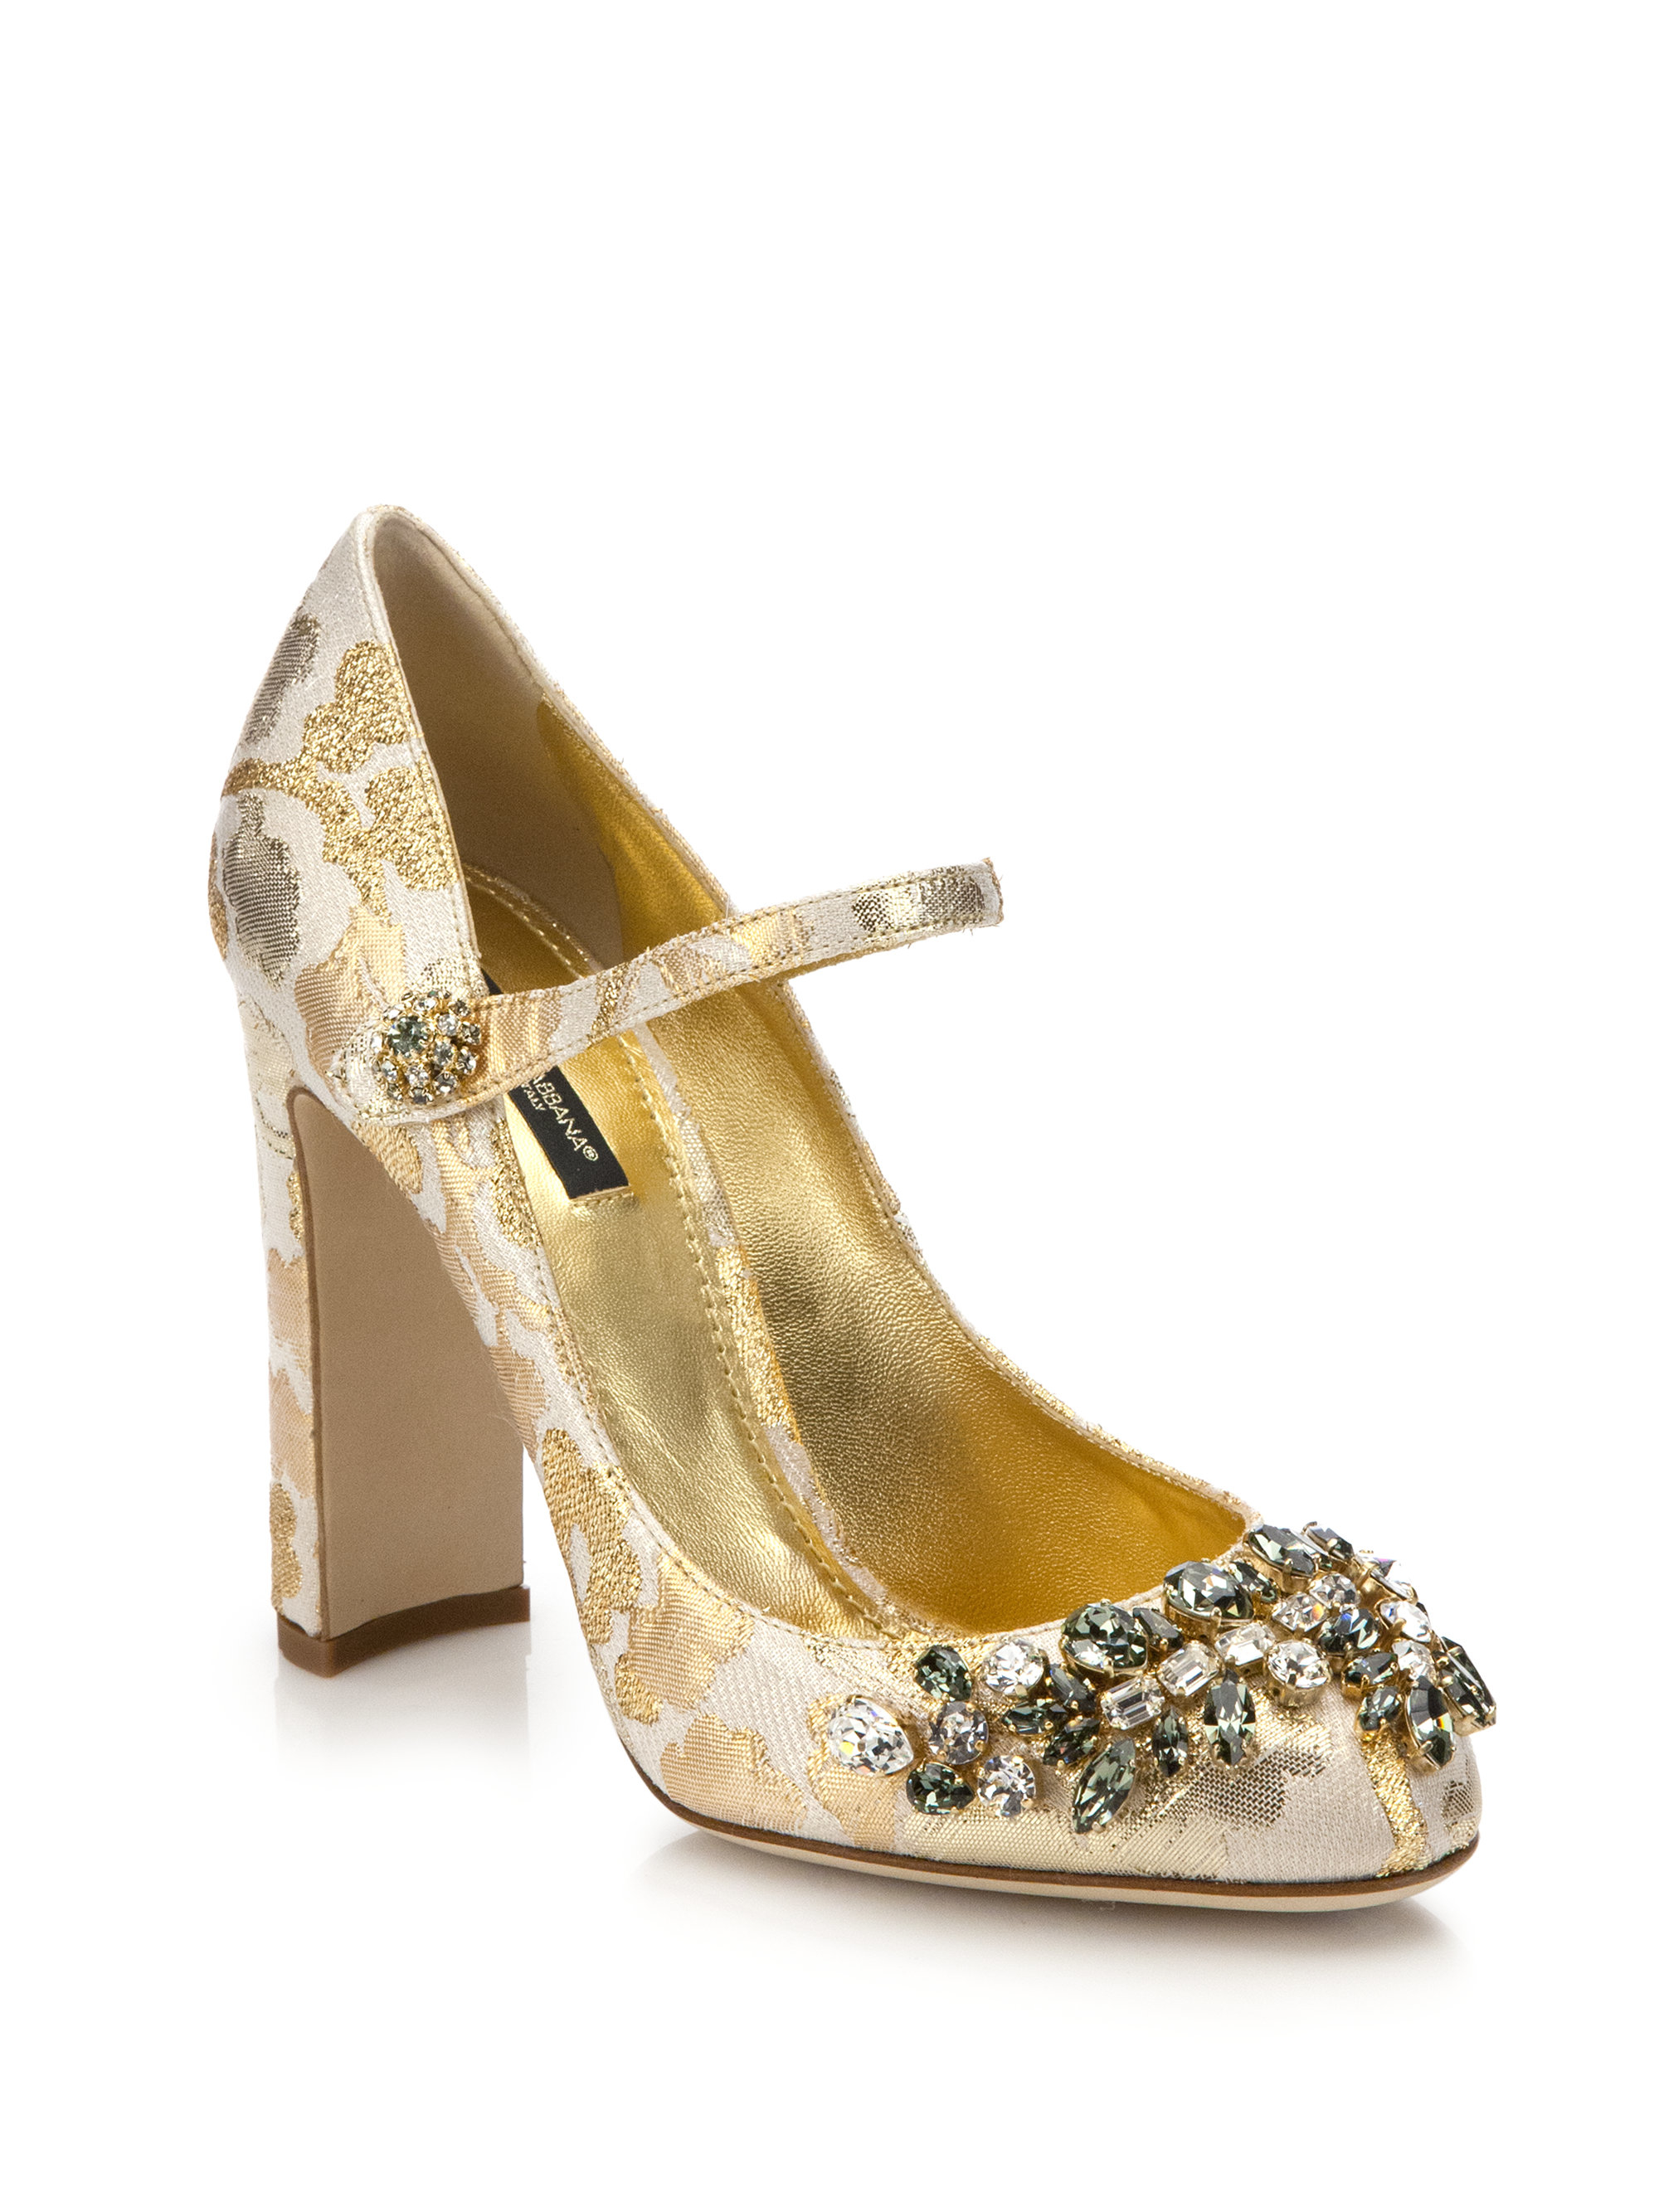 Dolce & Gabbana Embellished Brocade Mary Jane Pumps in Gold (Metallic) |  Lyst